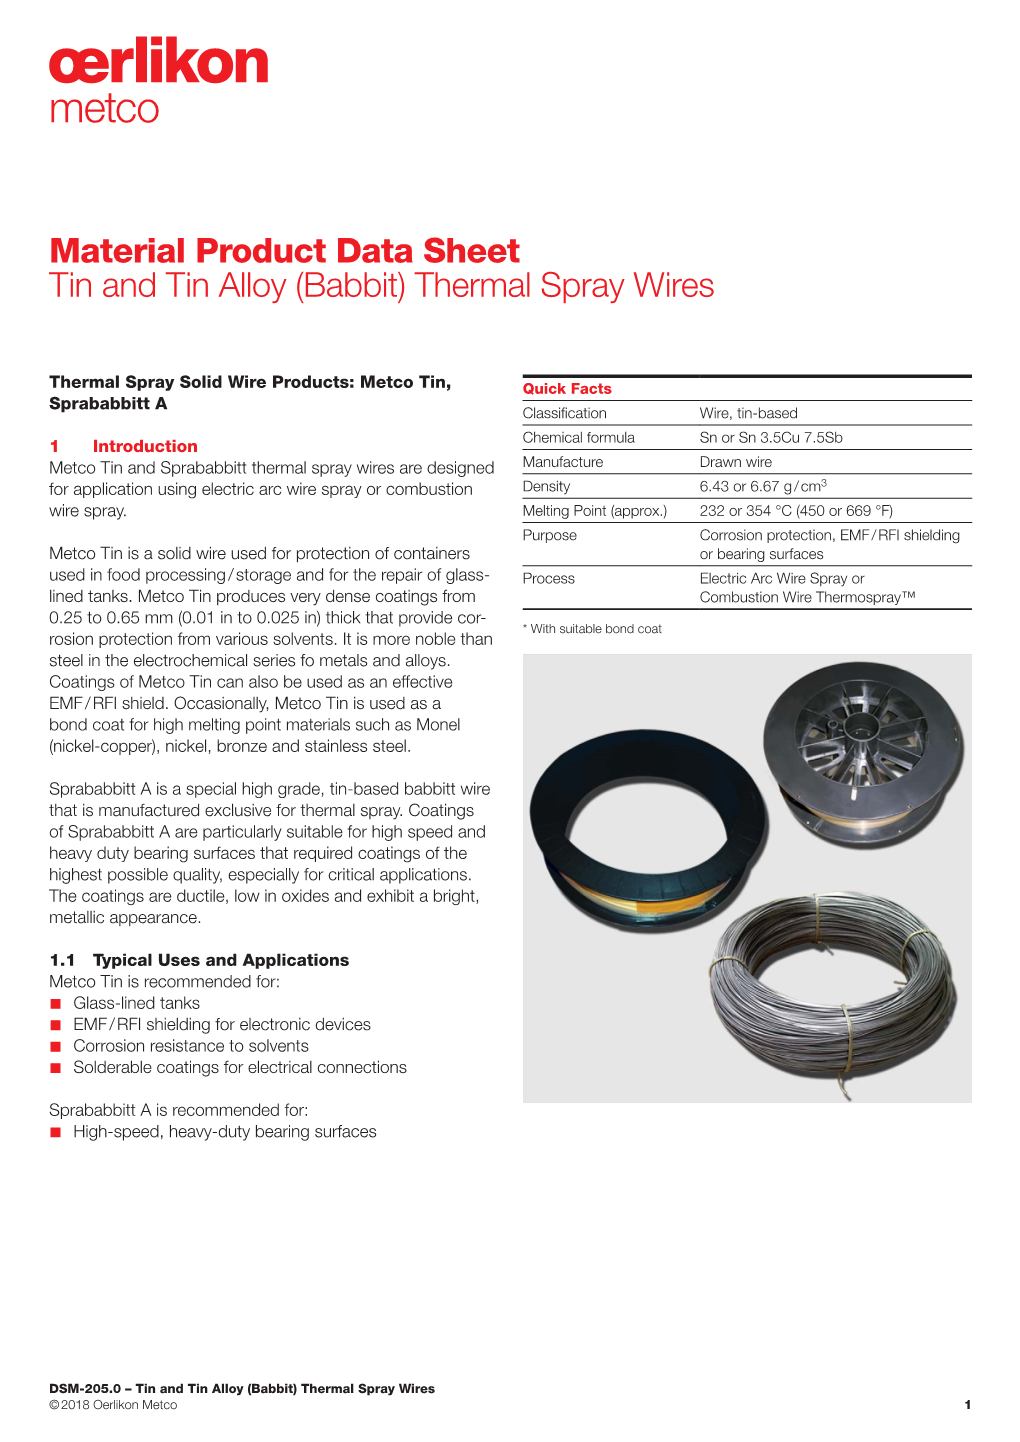 Material Product Data Sheet Tin and Tin Alloy (Babbit) Thermal Spray Wires